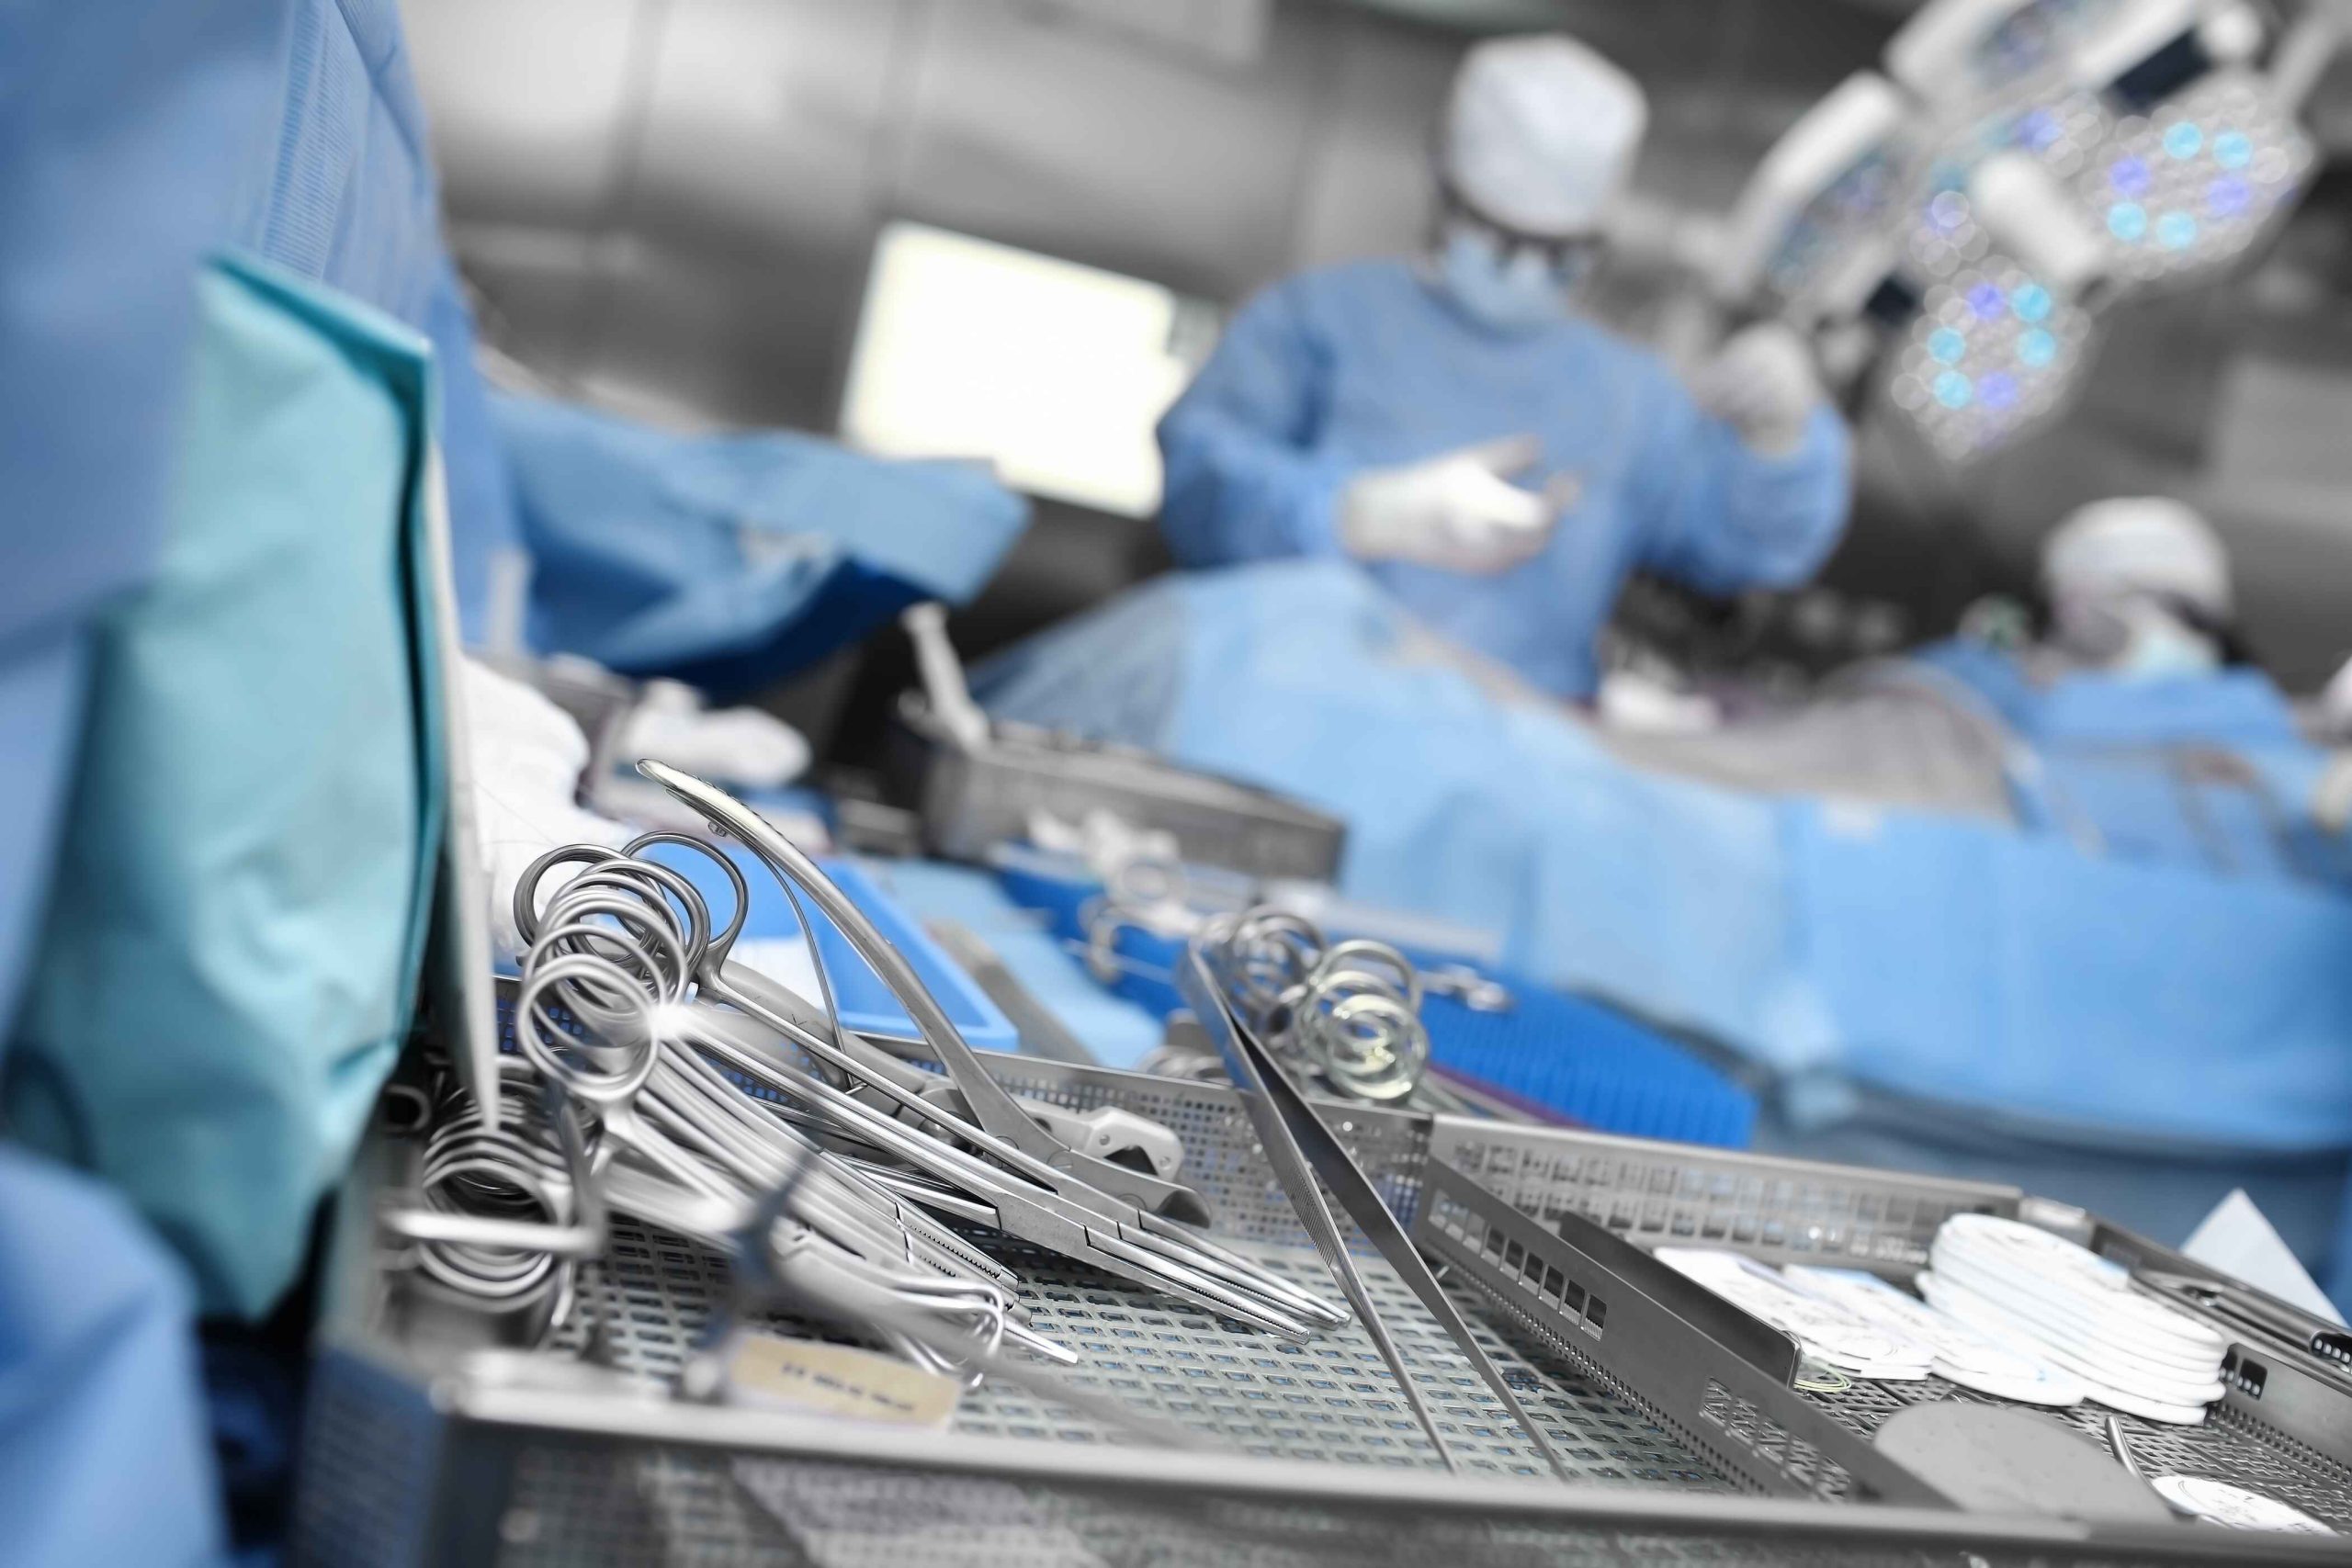 Surgical instruments in the foreground of a surgery.